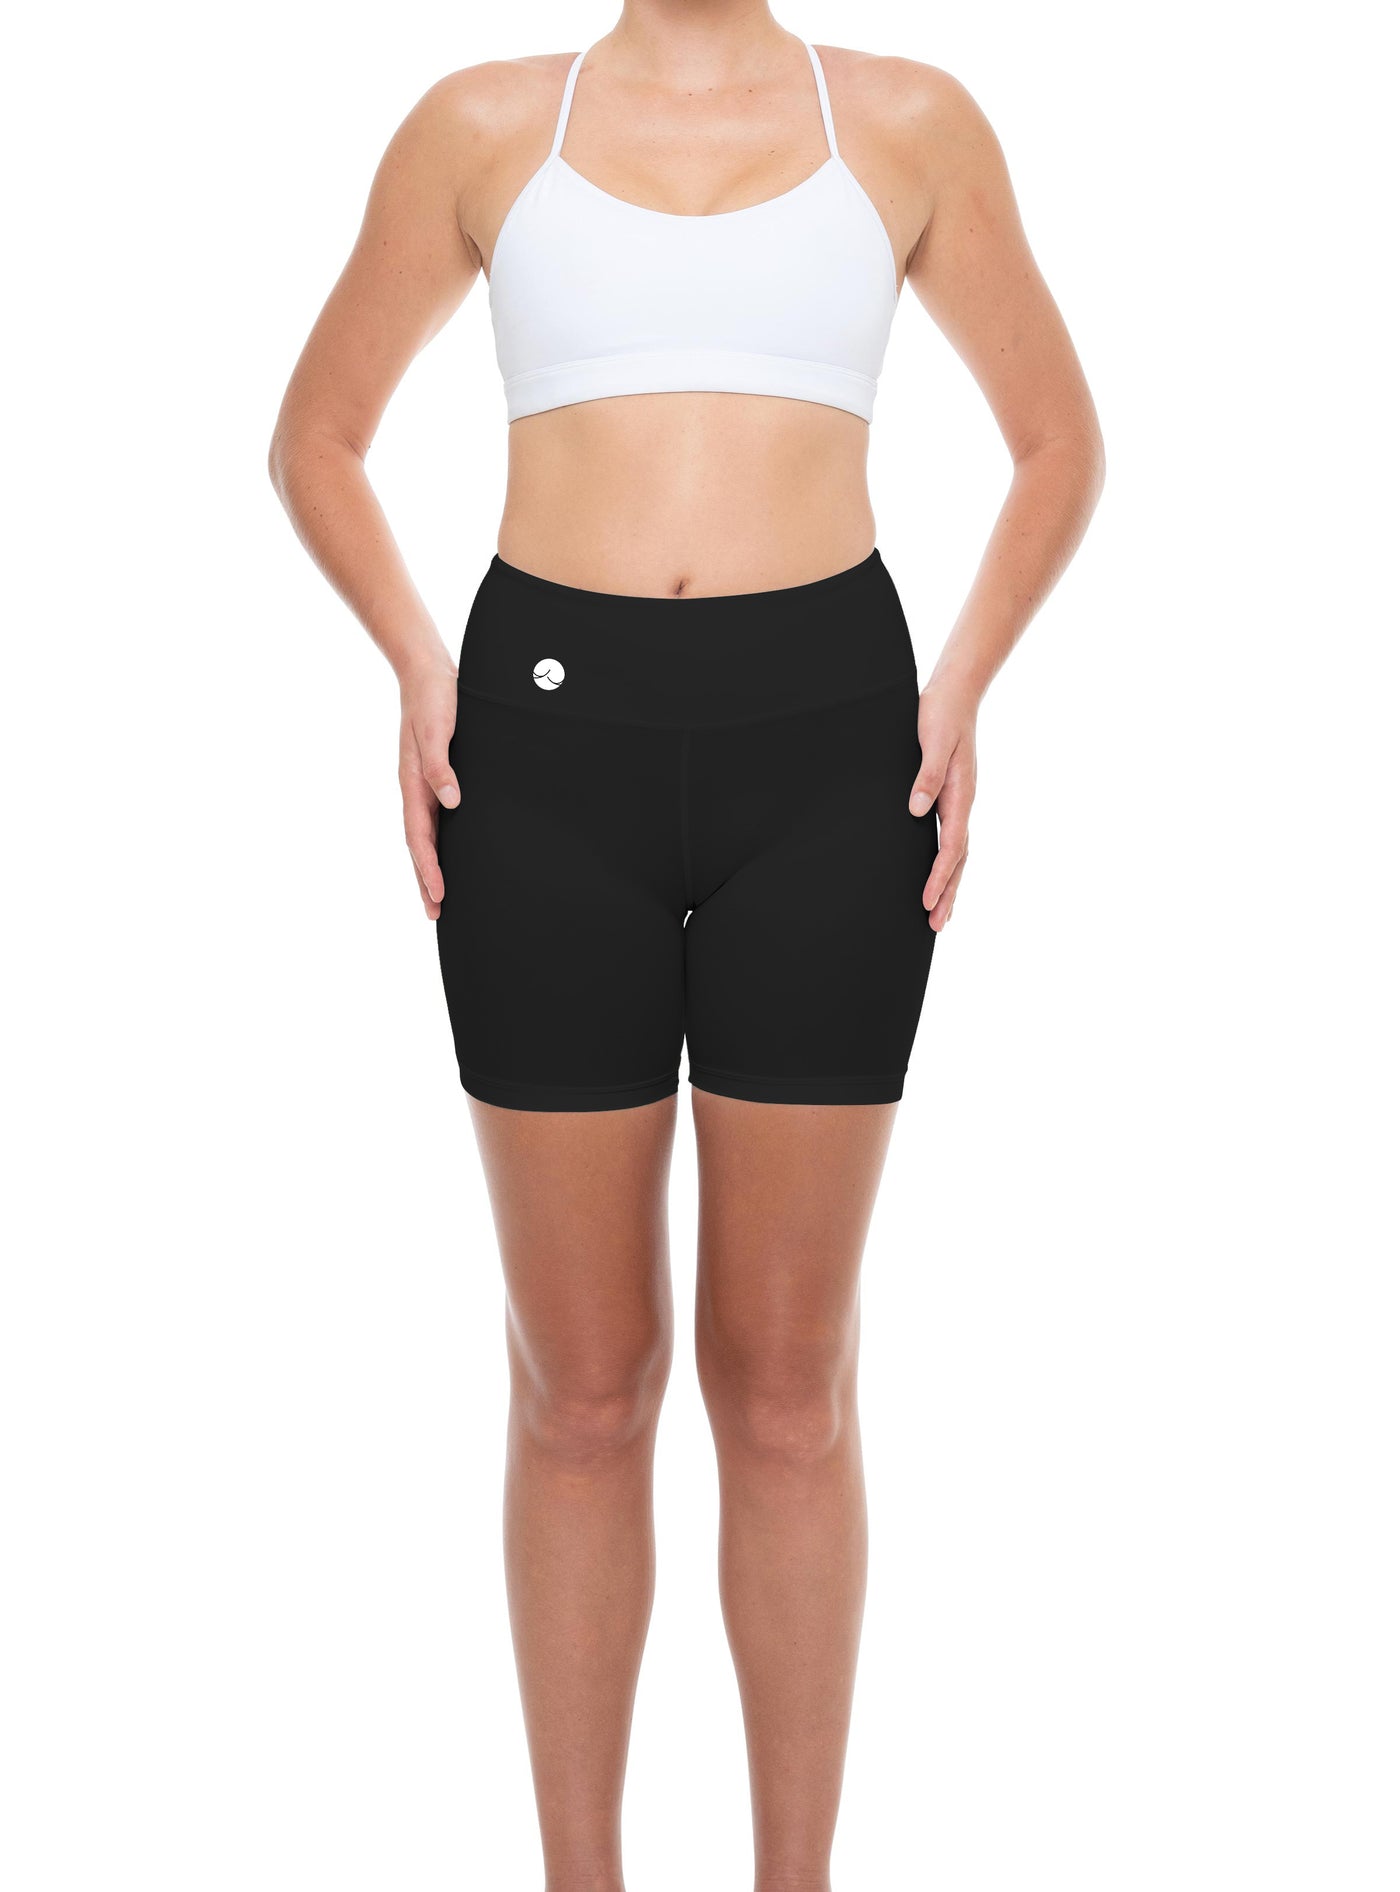 Women's Stealth Black Paddle Shorts (Incl. Seat Pad)